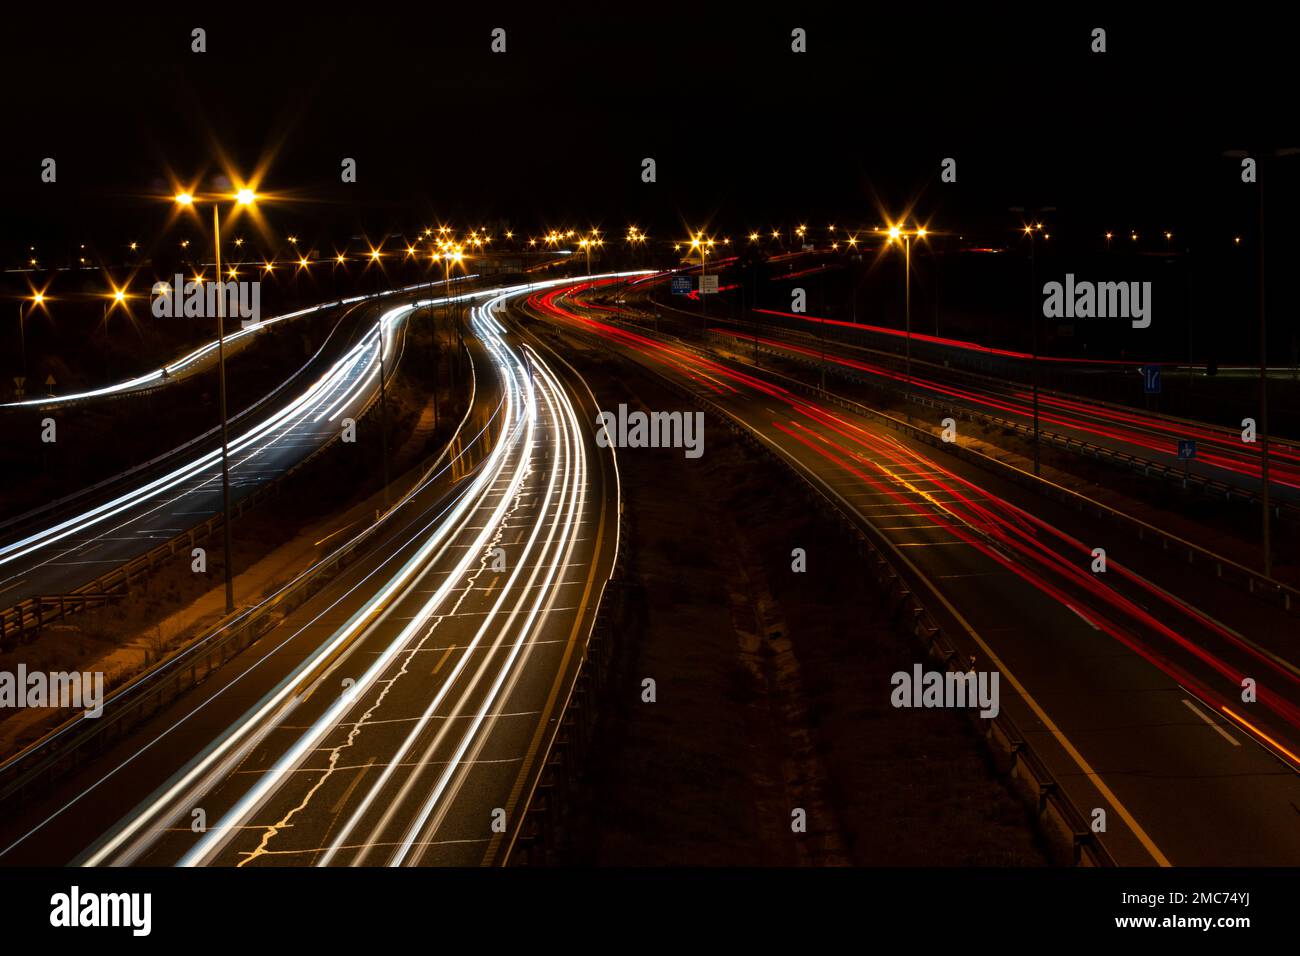 Light trails from cars at night on a multi-lane highway in madrid Stock Photo